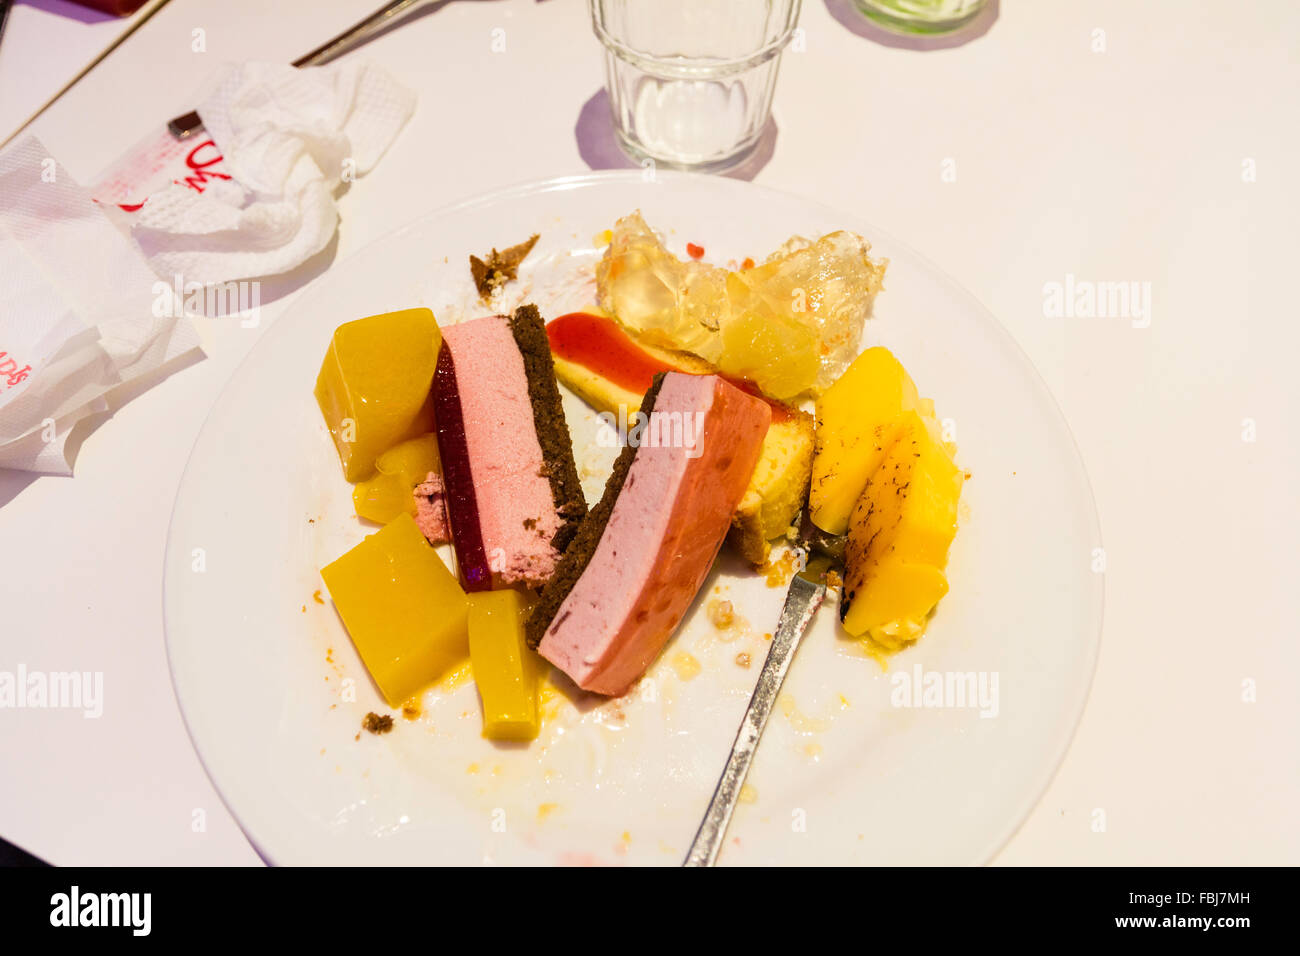 Japan. 'Sweet Paradise' Japanese famous all-you-can-eat cake and sweet restaurant. Plate, with folk, full of various deserts and cakes on table. Stock Photo